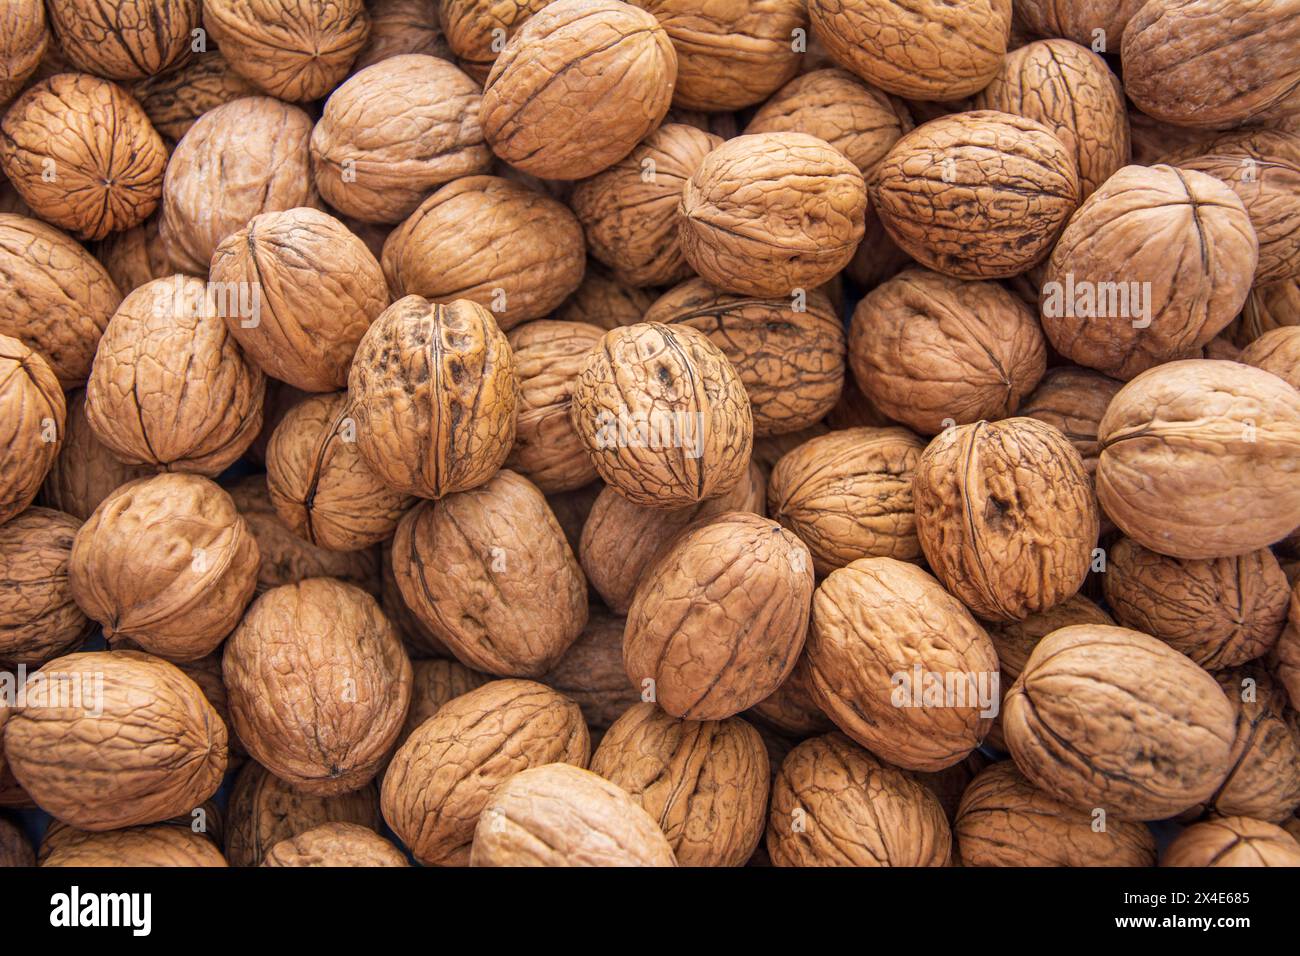 Screen walnut textured background covered with walnuts Stock Photo